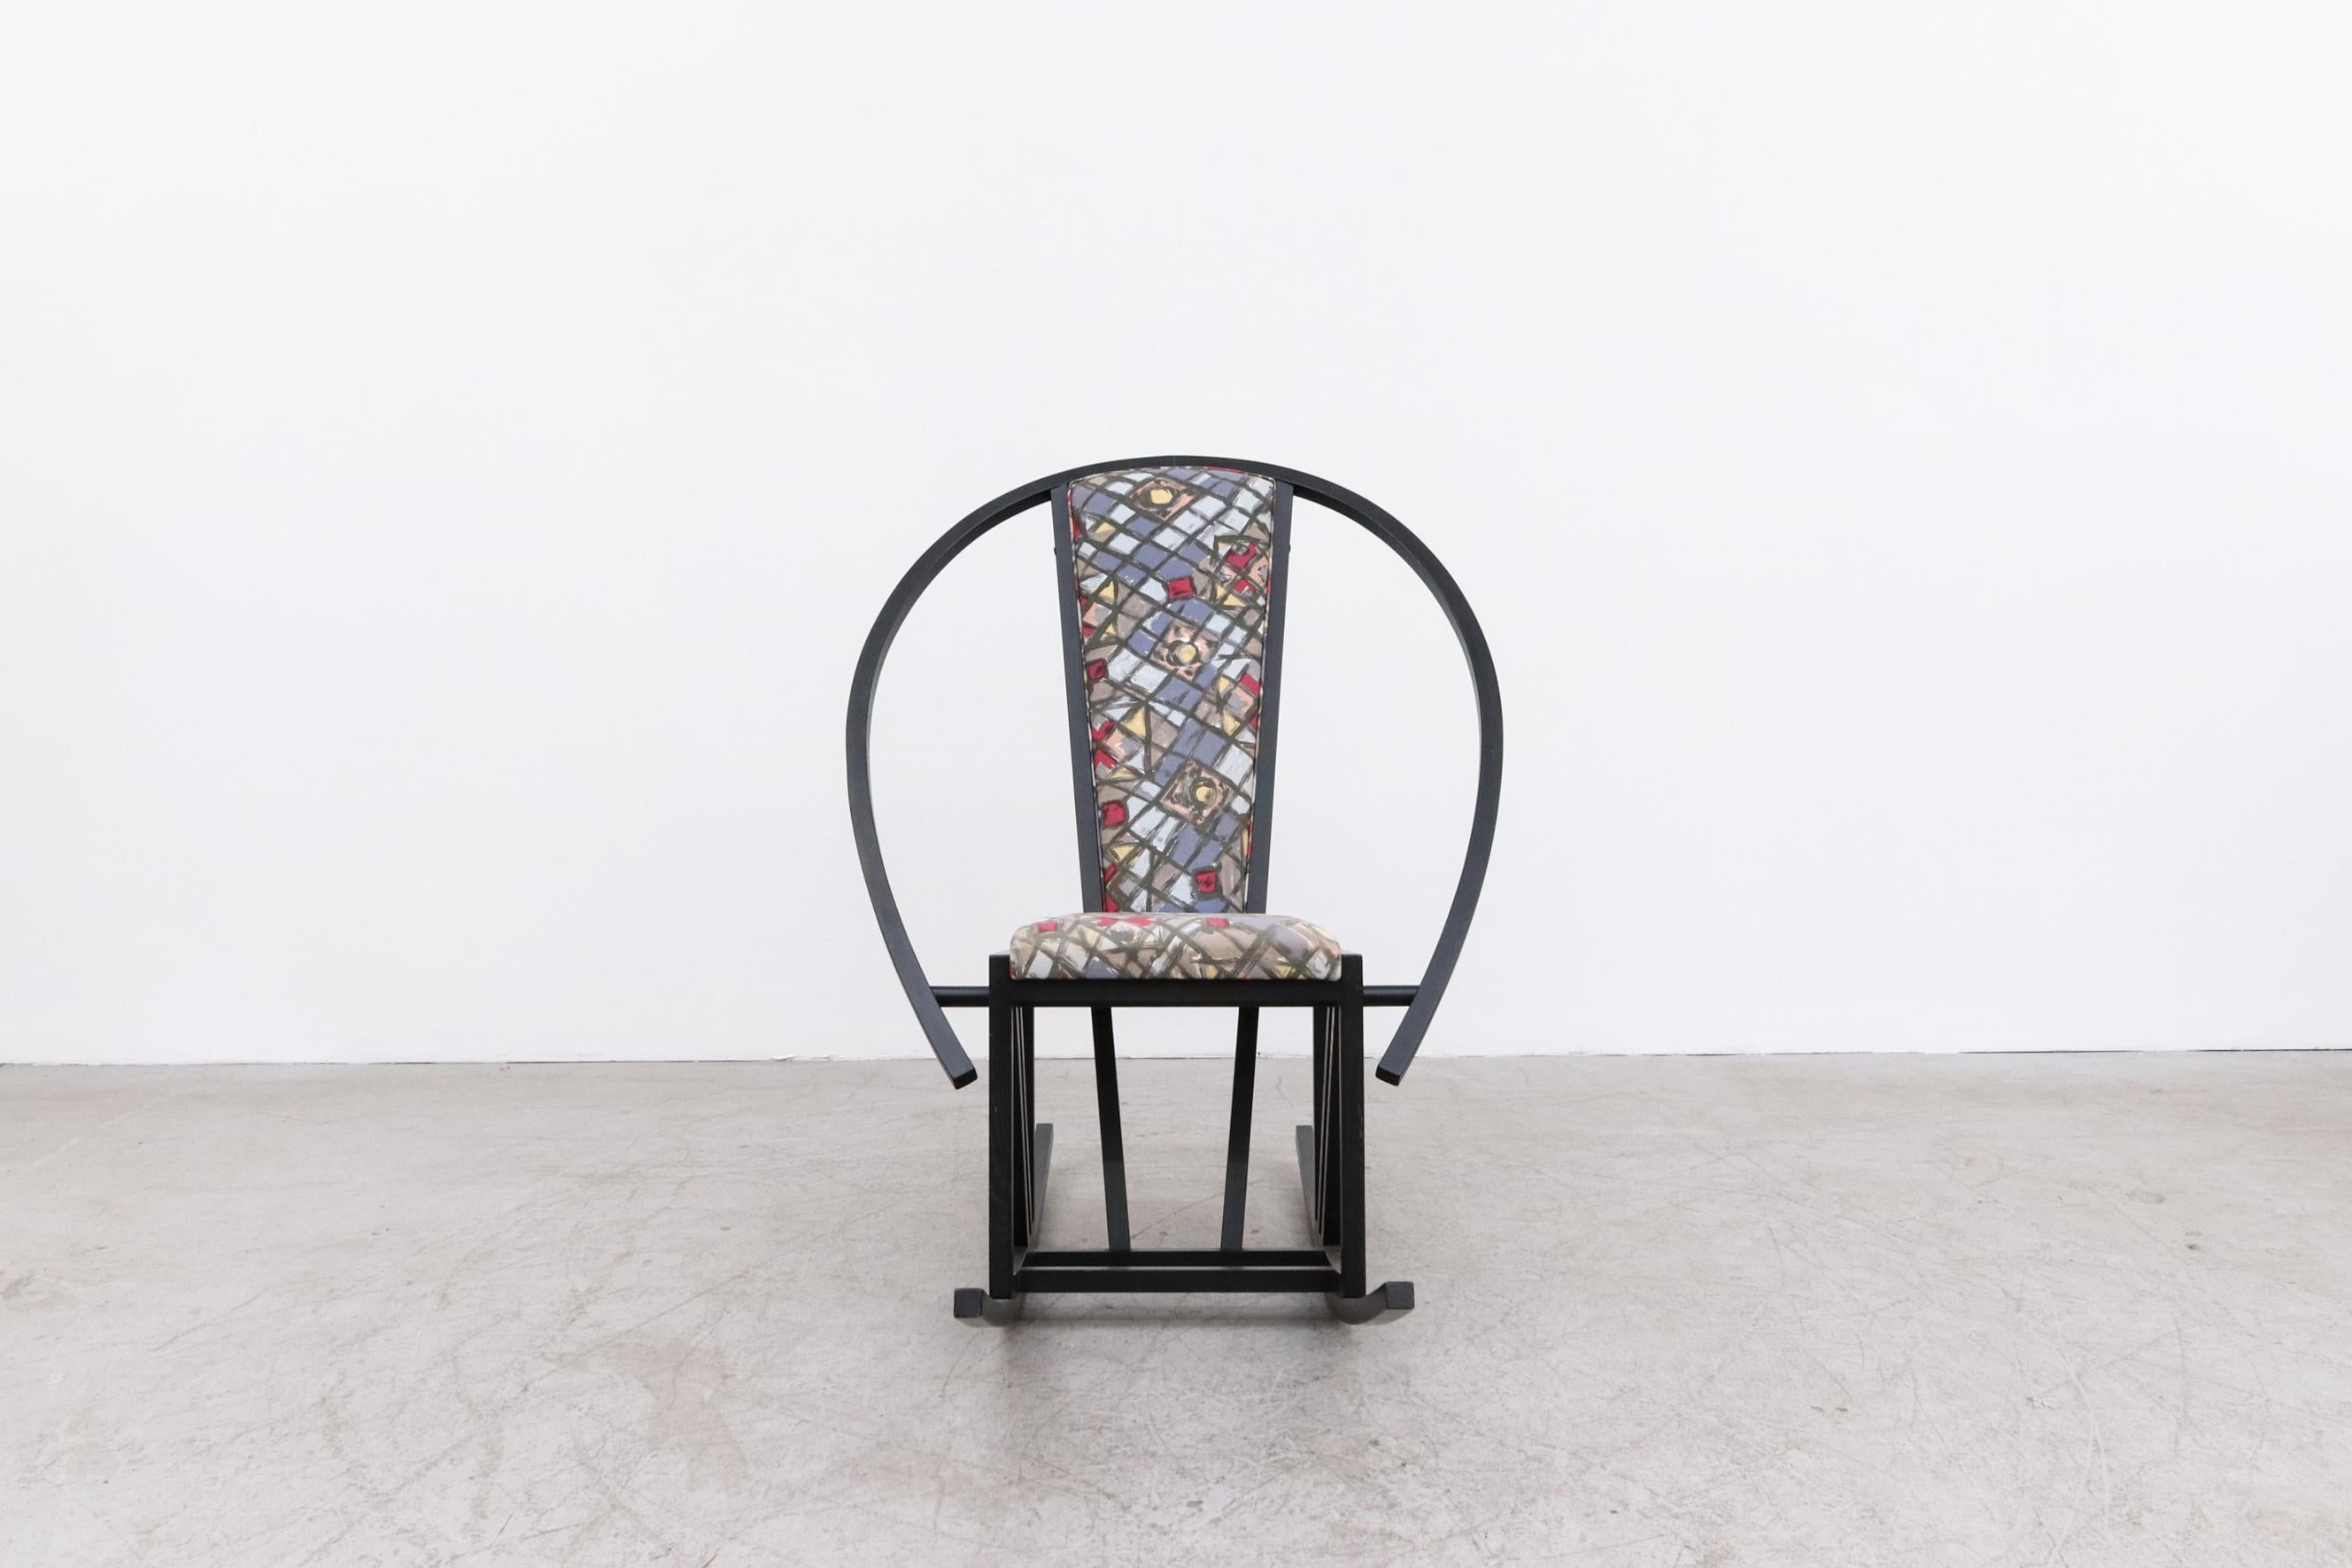 Fun Ettore Sottsass inspired Memphis style rocking chair with bent, black ebonized wood frame. This chair features a Memphis style graphic printed upholstery as well. Measures: Seat width is 15